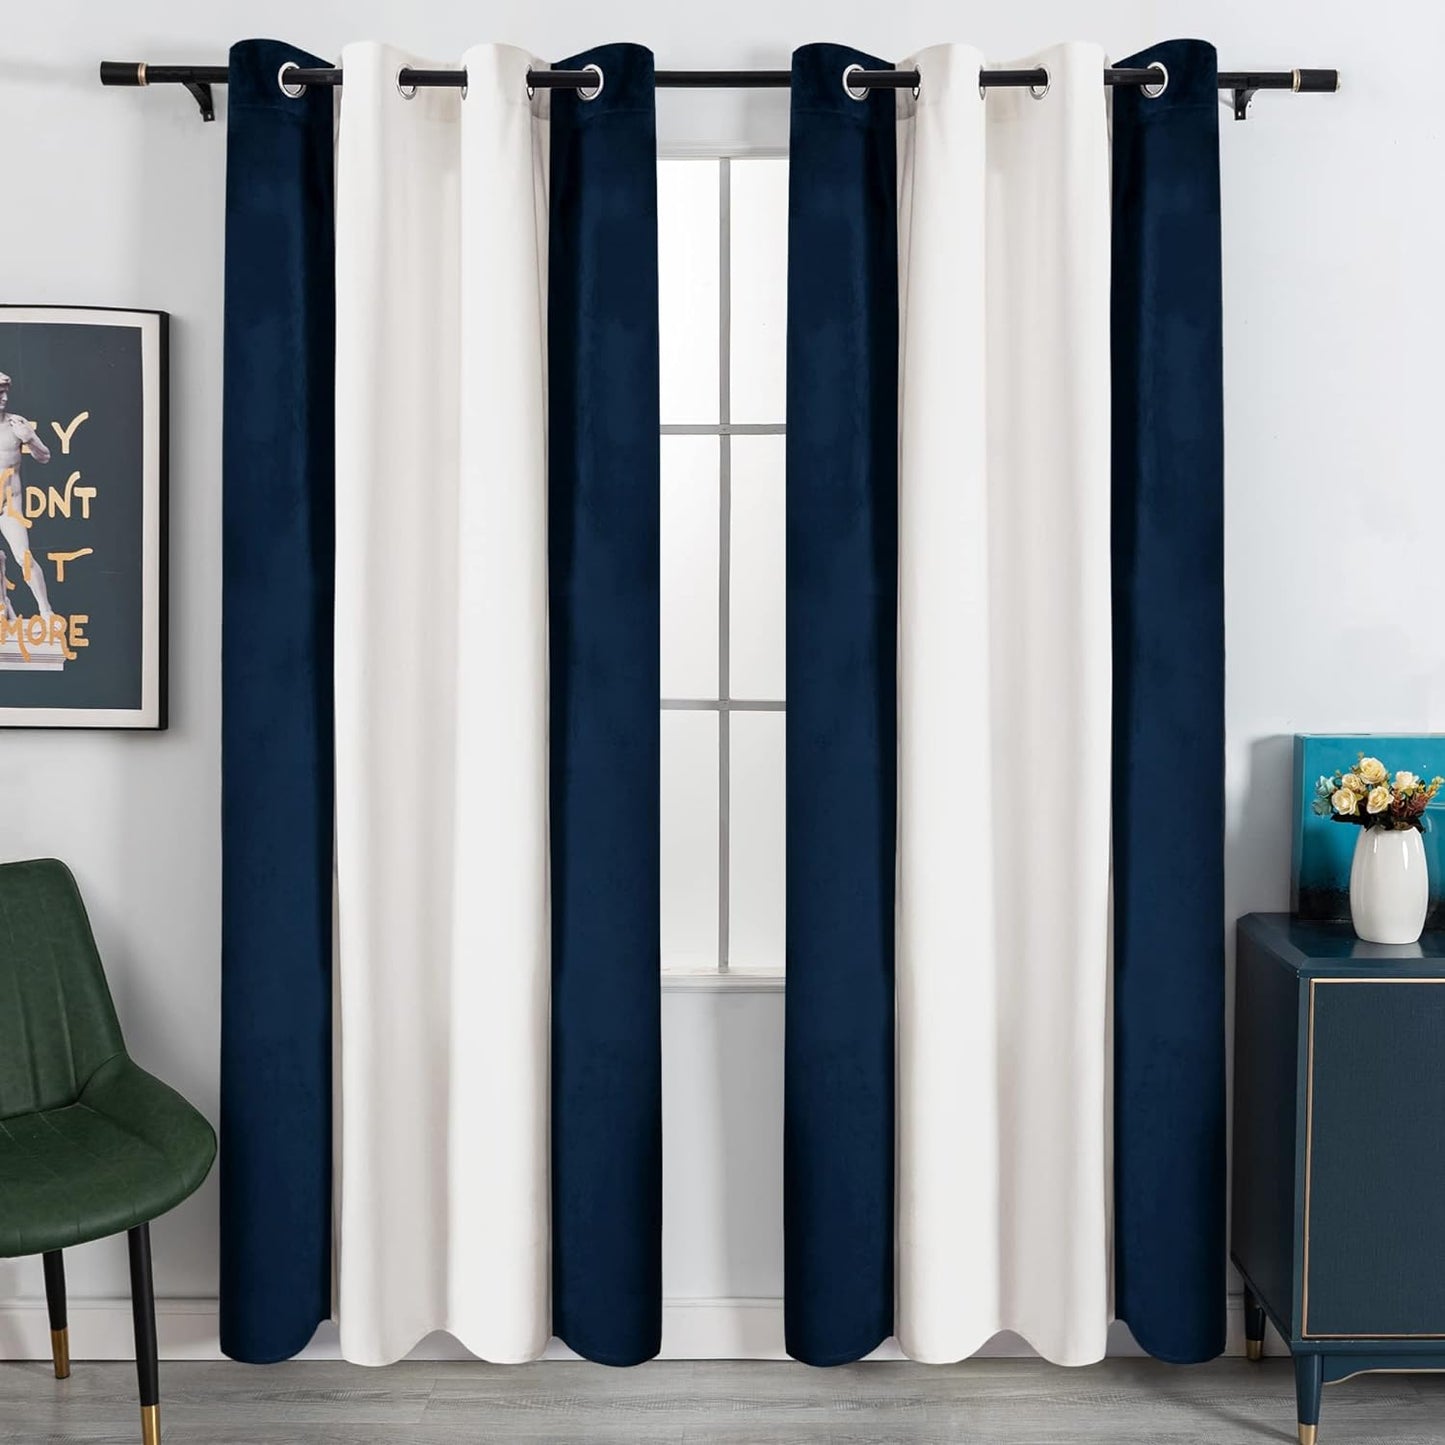 Victree Color Block Velvet Curtains for Bedroom, Patchwork Blackout Curtains 52 X 84 Inch Length - Room Darkening Sun Light Blocking Grommet Window Drapes for Living Room, 2 Panels, Black and White  Victree Navy/White 52 X 108 Inches 